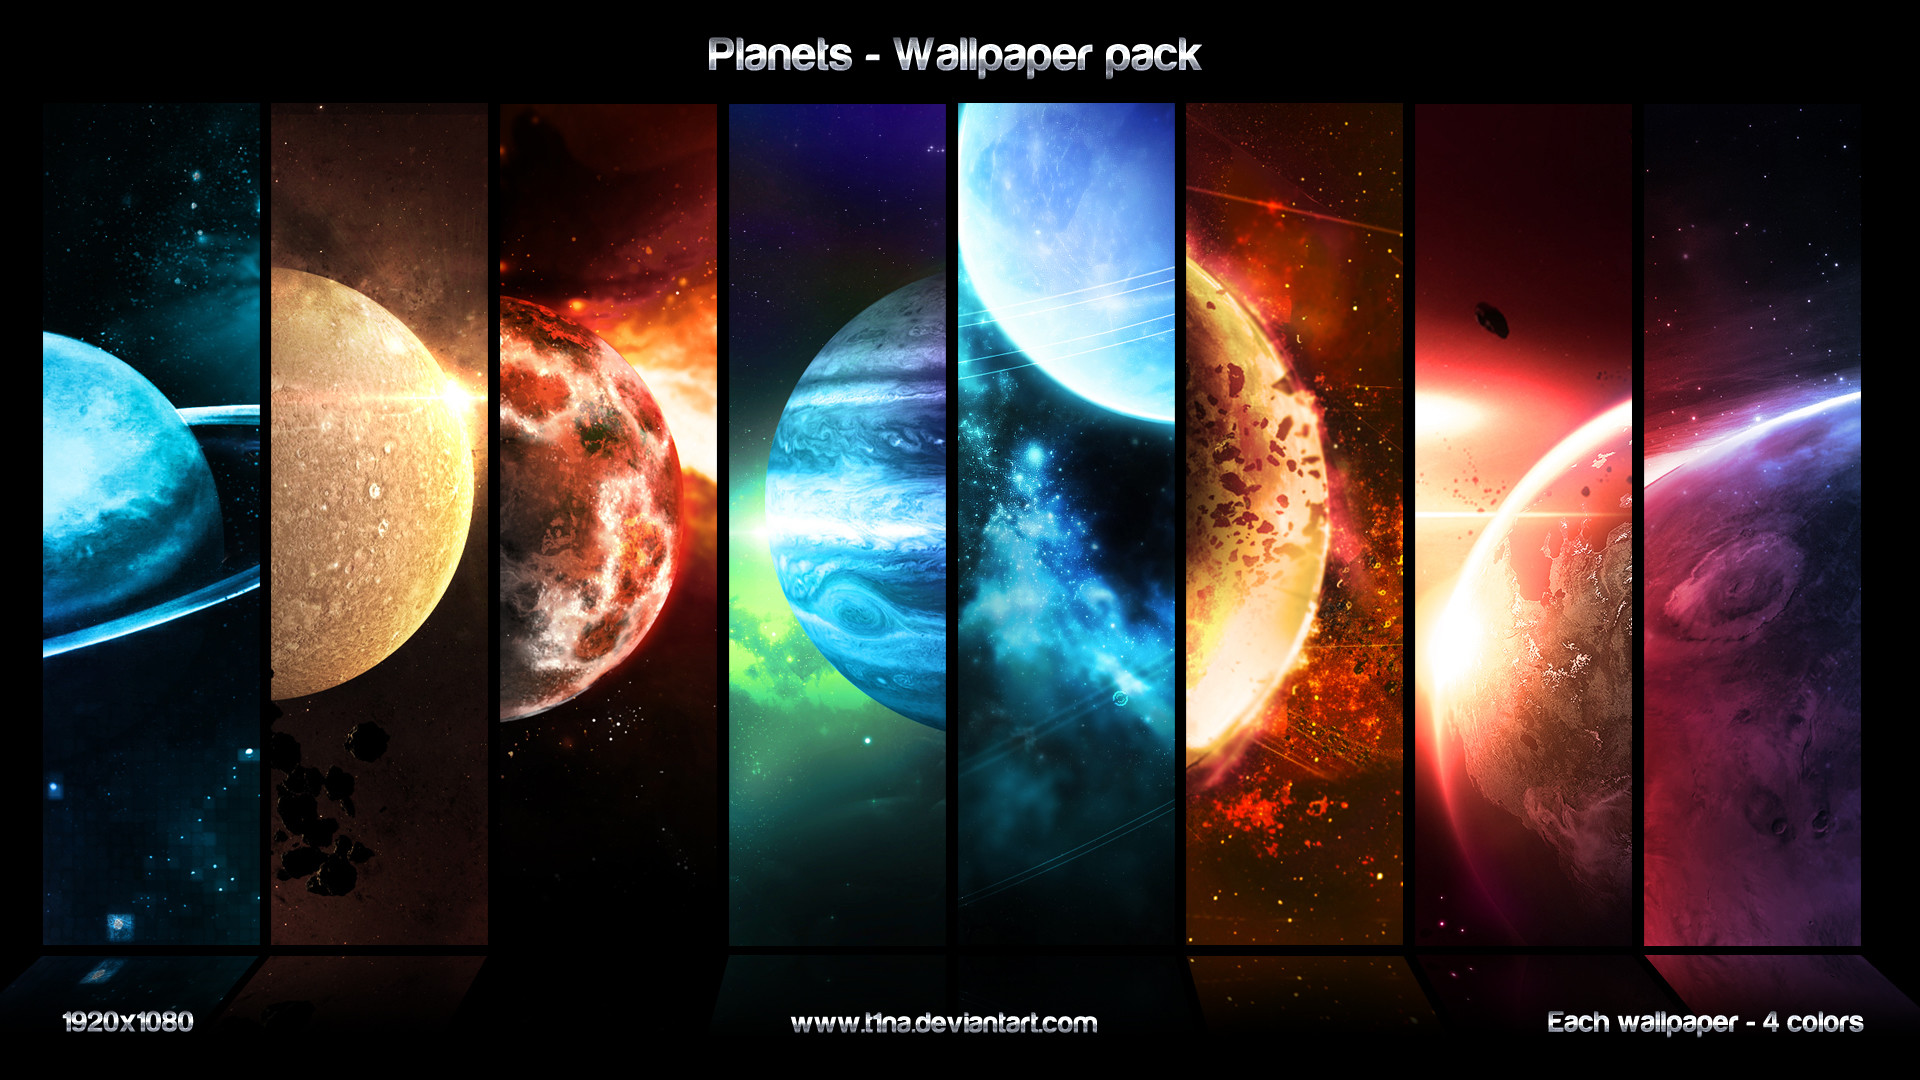 1920x1080 Planets - wallpaper pack by t1na Planets - wallpaper pack by t1na